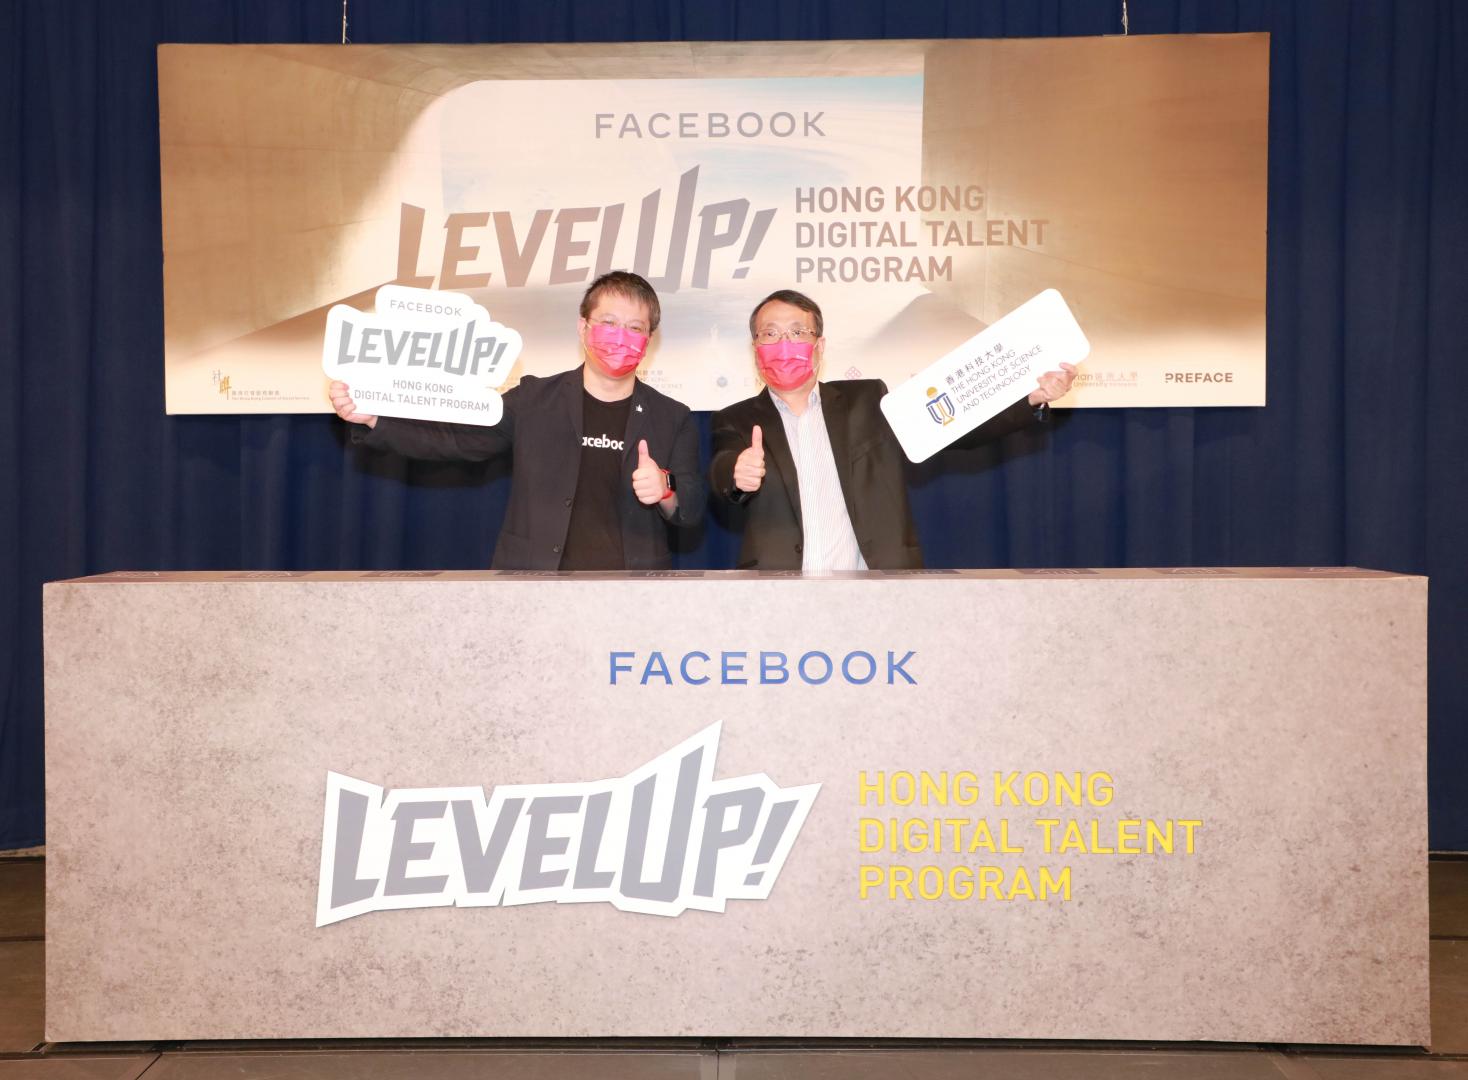 Prof. King CHOW, Acting Dean of Students at HKUST (Right) and Mr. George CHEN, Director of Public Policy for Greater China, Mongolia, and Central Asia at Facebook kick-start the “Level Up Digital Talent Program” at the launching ceremony.